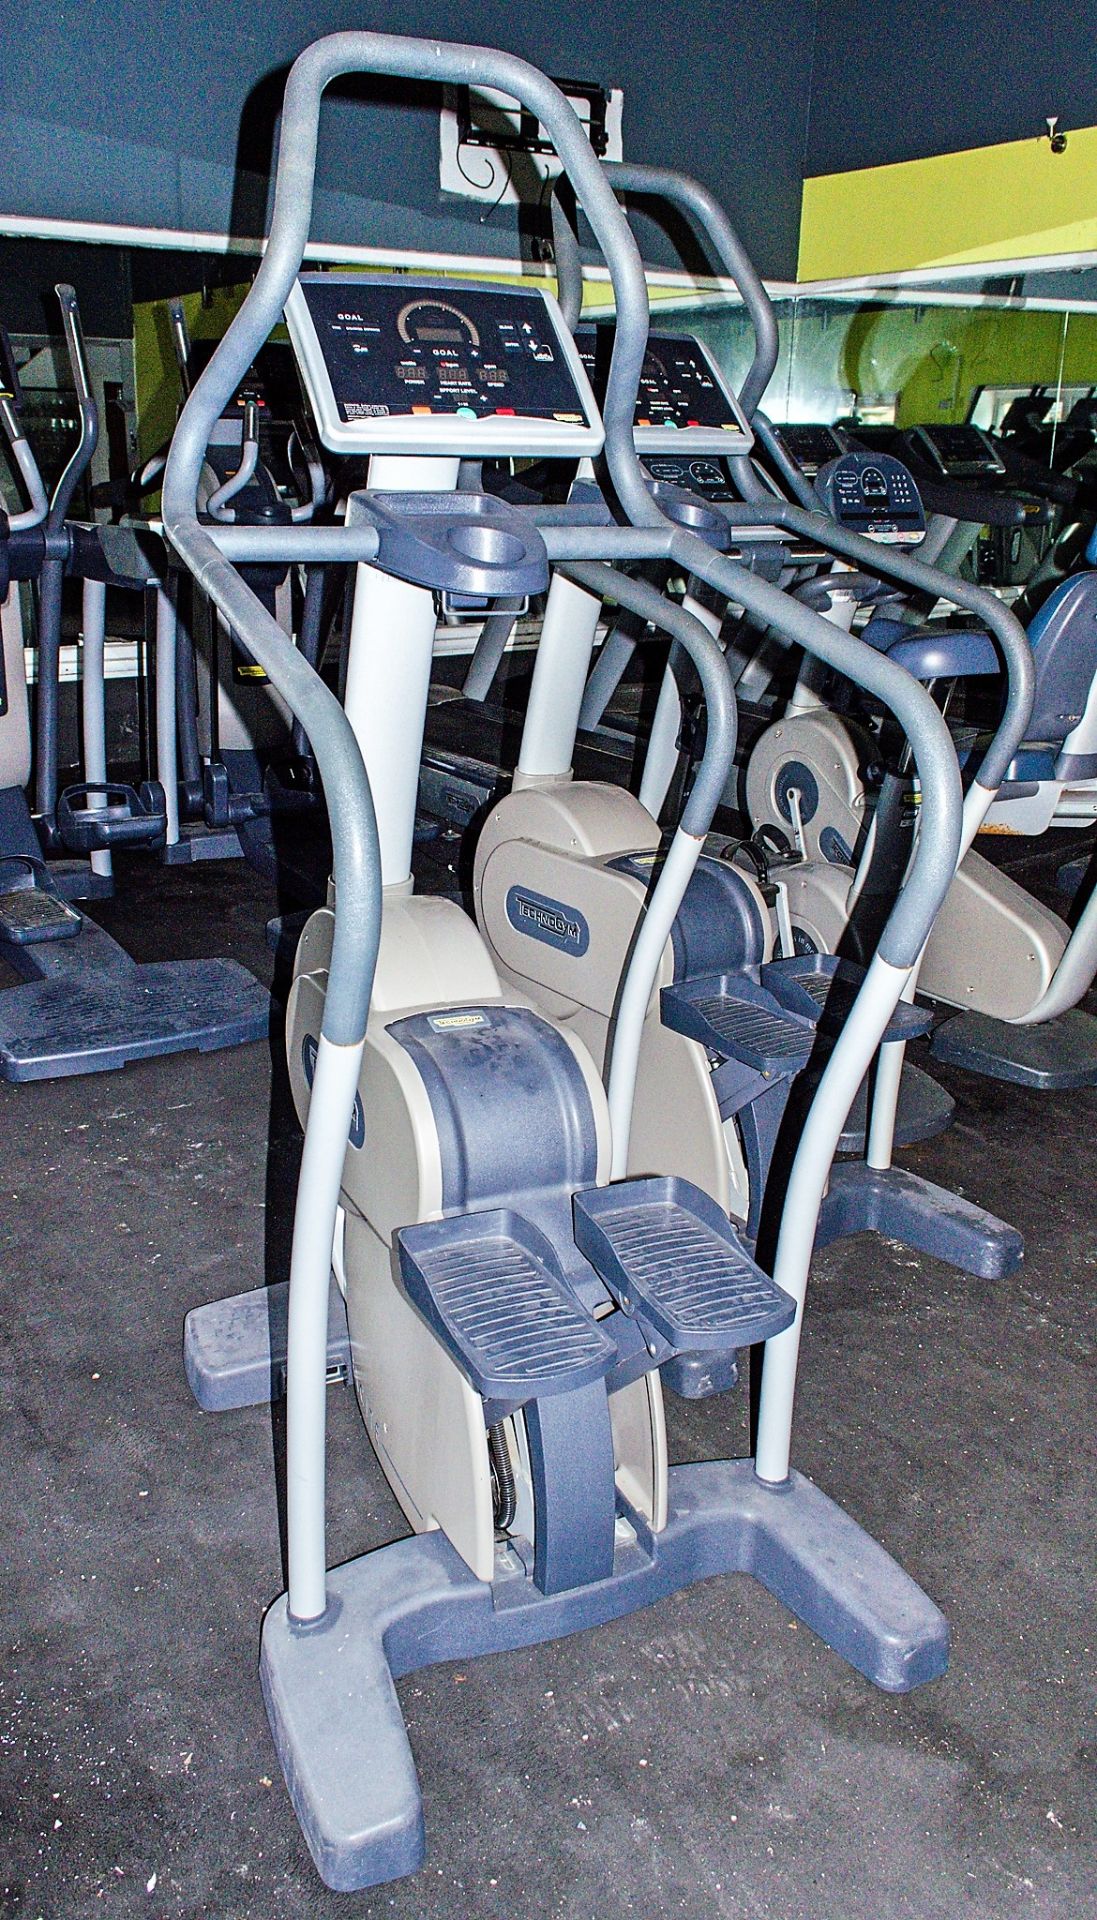 Technogym Excite 700i stepper ** No VAT on hammer price but VAT will be charged on buyers